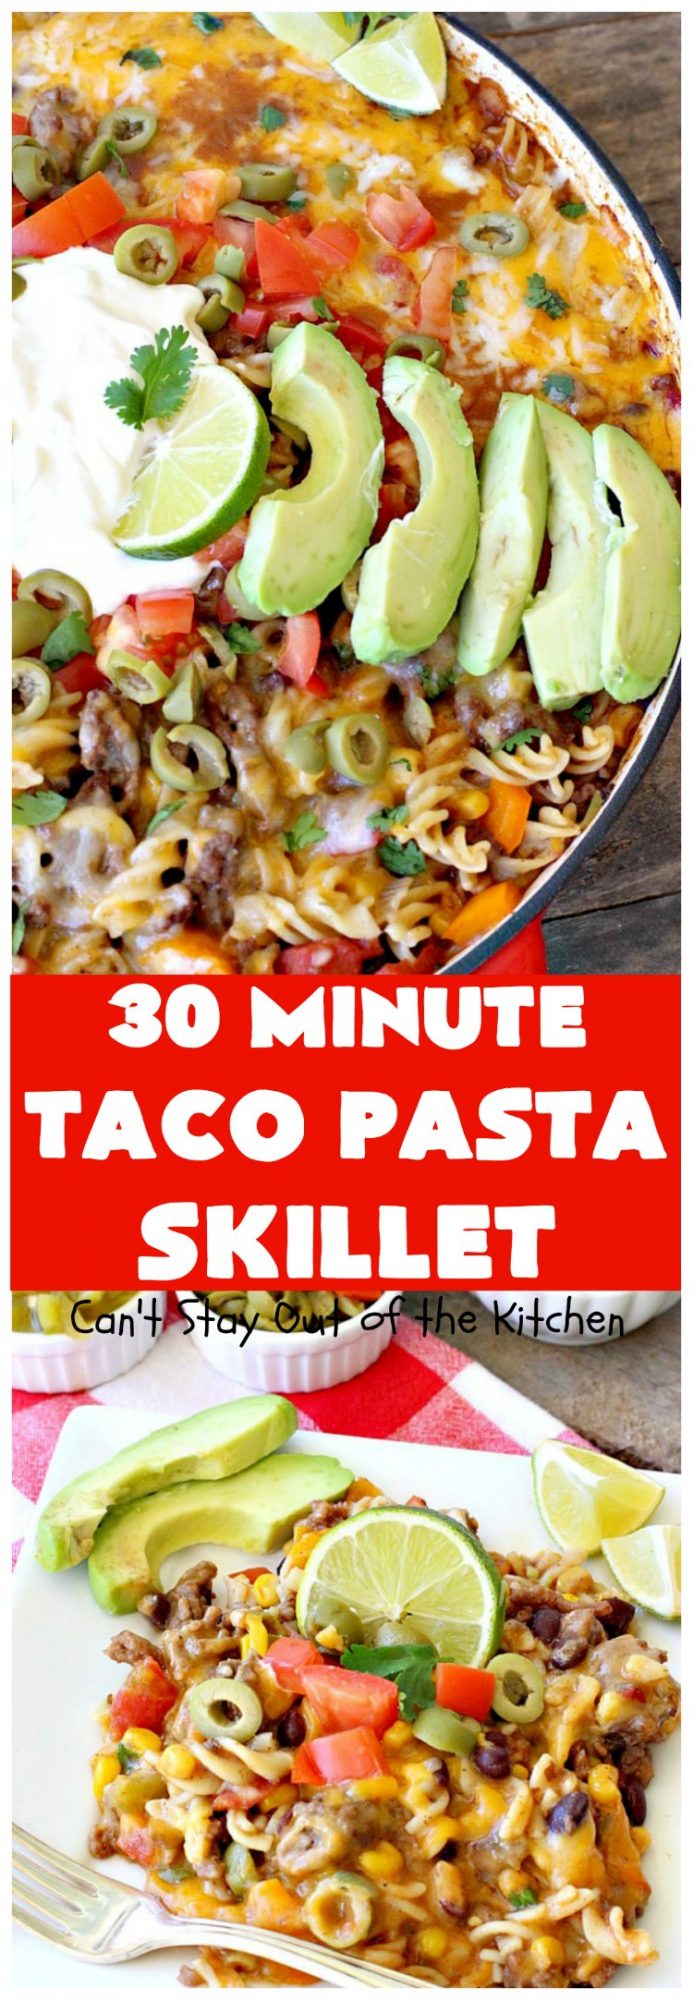 Taco Pasta Skillet – Can't Stay Out of the Kitchen